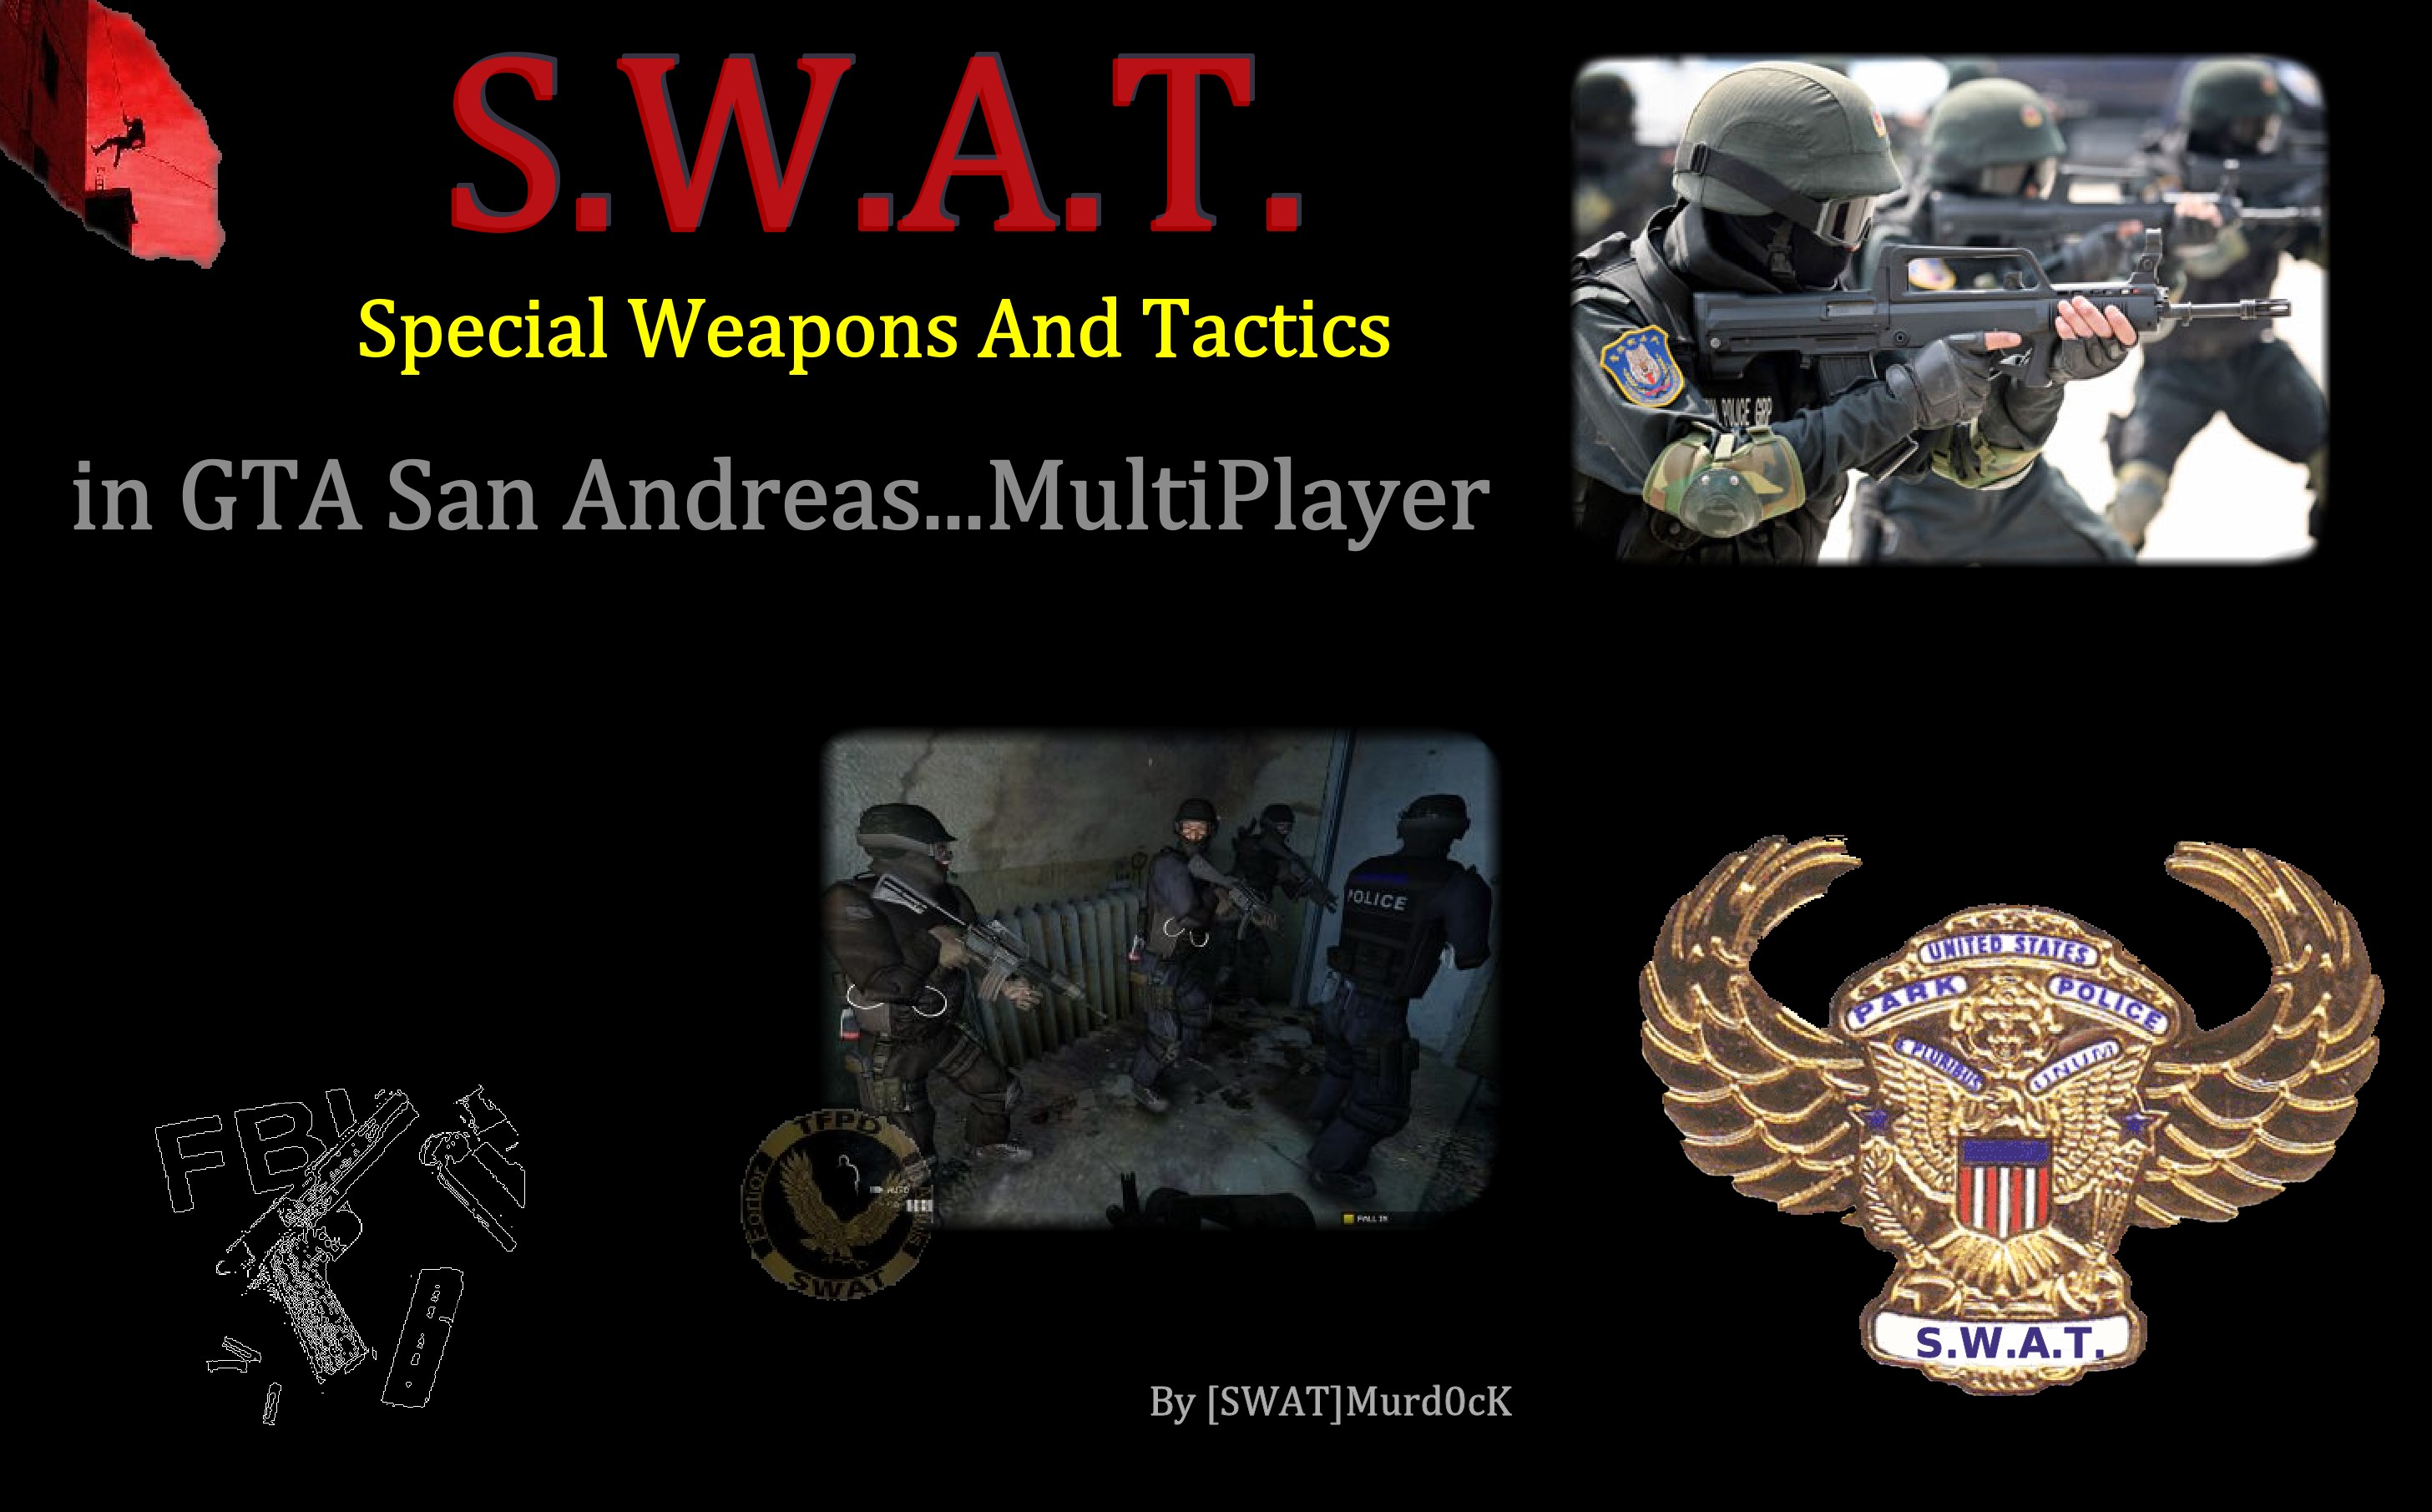 Wallpaper S Puter For Swat Official